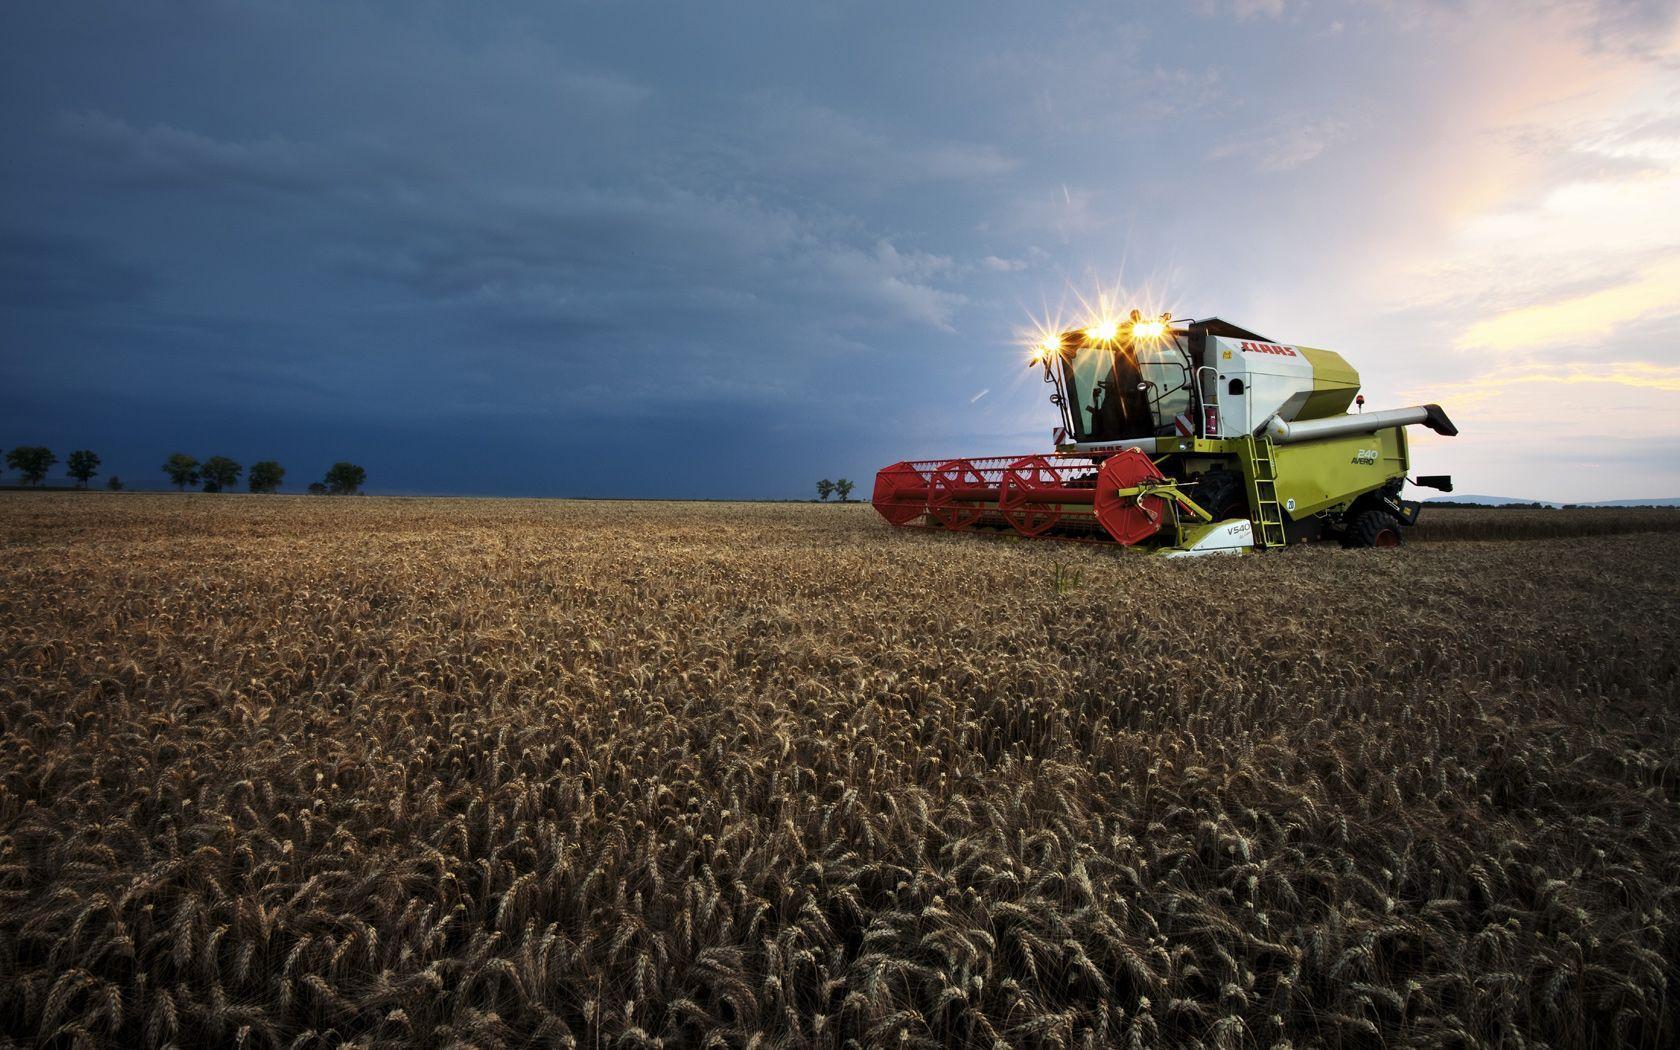 Claas Wallpaper, HDQ Claas Image Collection for Desktop, VV.477